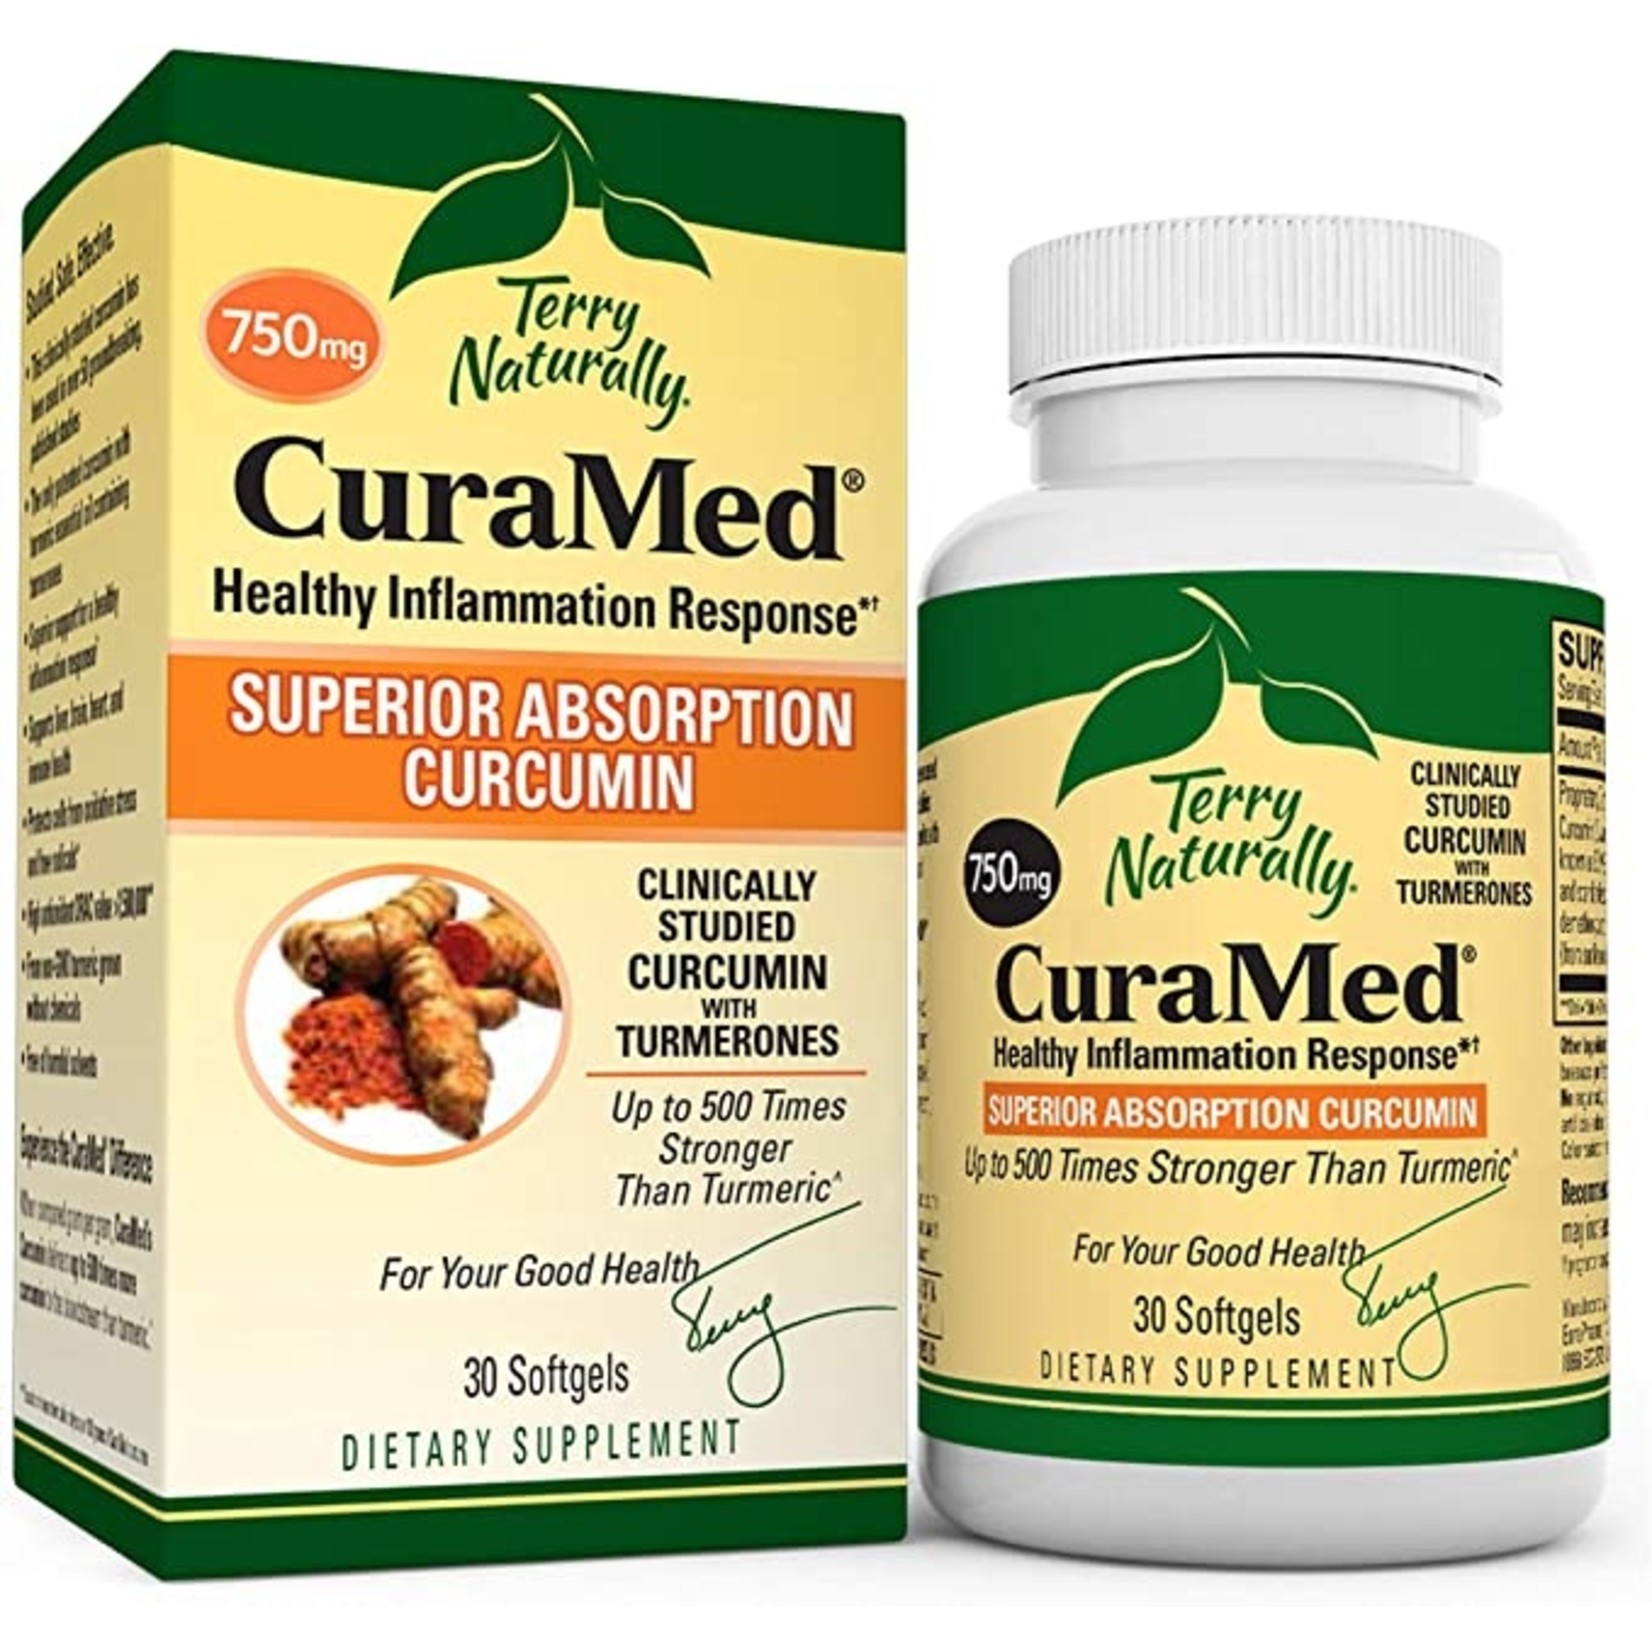 Terry Naturally Terry Naturally - Curamed 750 mg - 30 Softgels